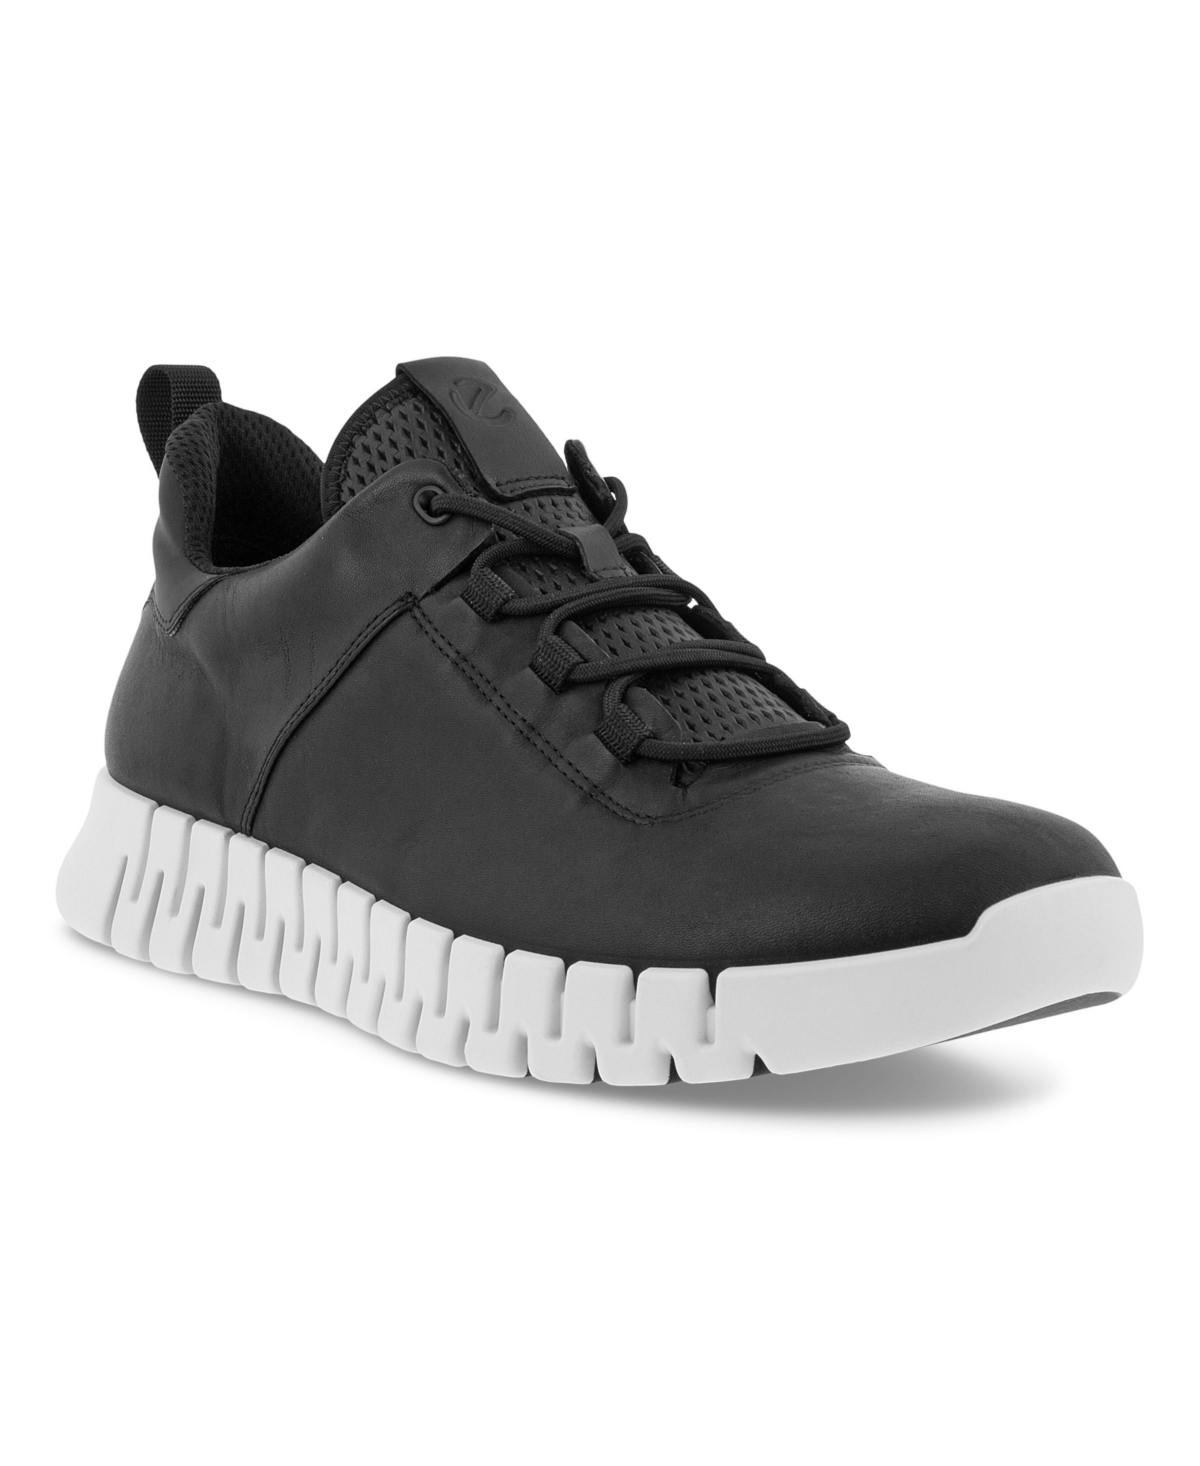 Men's Gruuv Lace Up Sneakers - Black